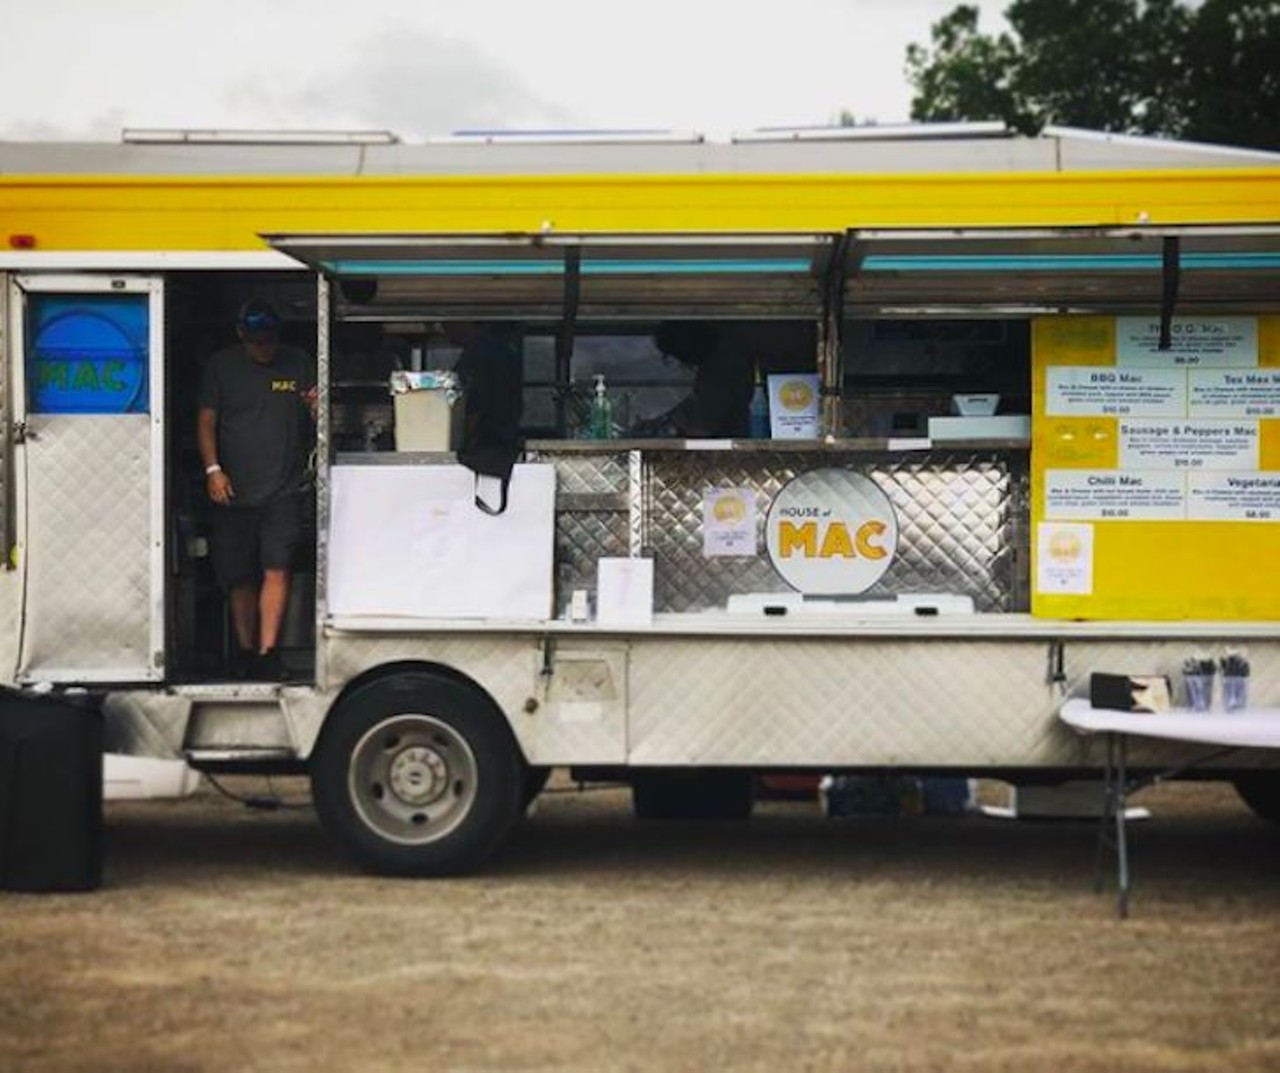 House of Mac
detroithouseofmac.com
The &#147;mac&#148; daddy of food trucks, House of Mac is your childhood dreams realized with a variety of cheesy pasta options.
Photo via House of Mac/Instagram